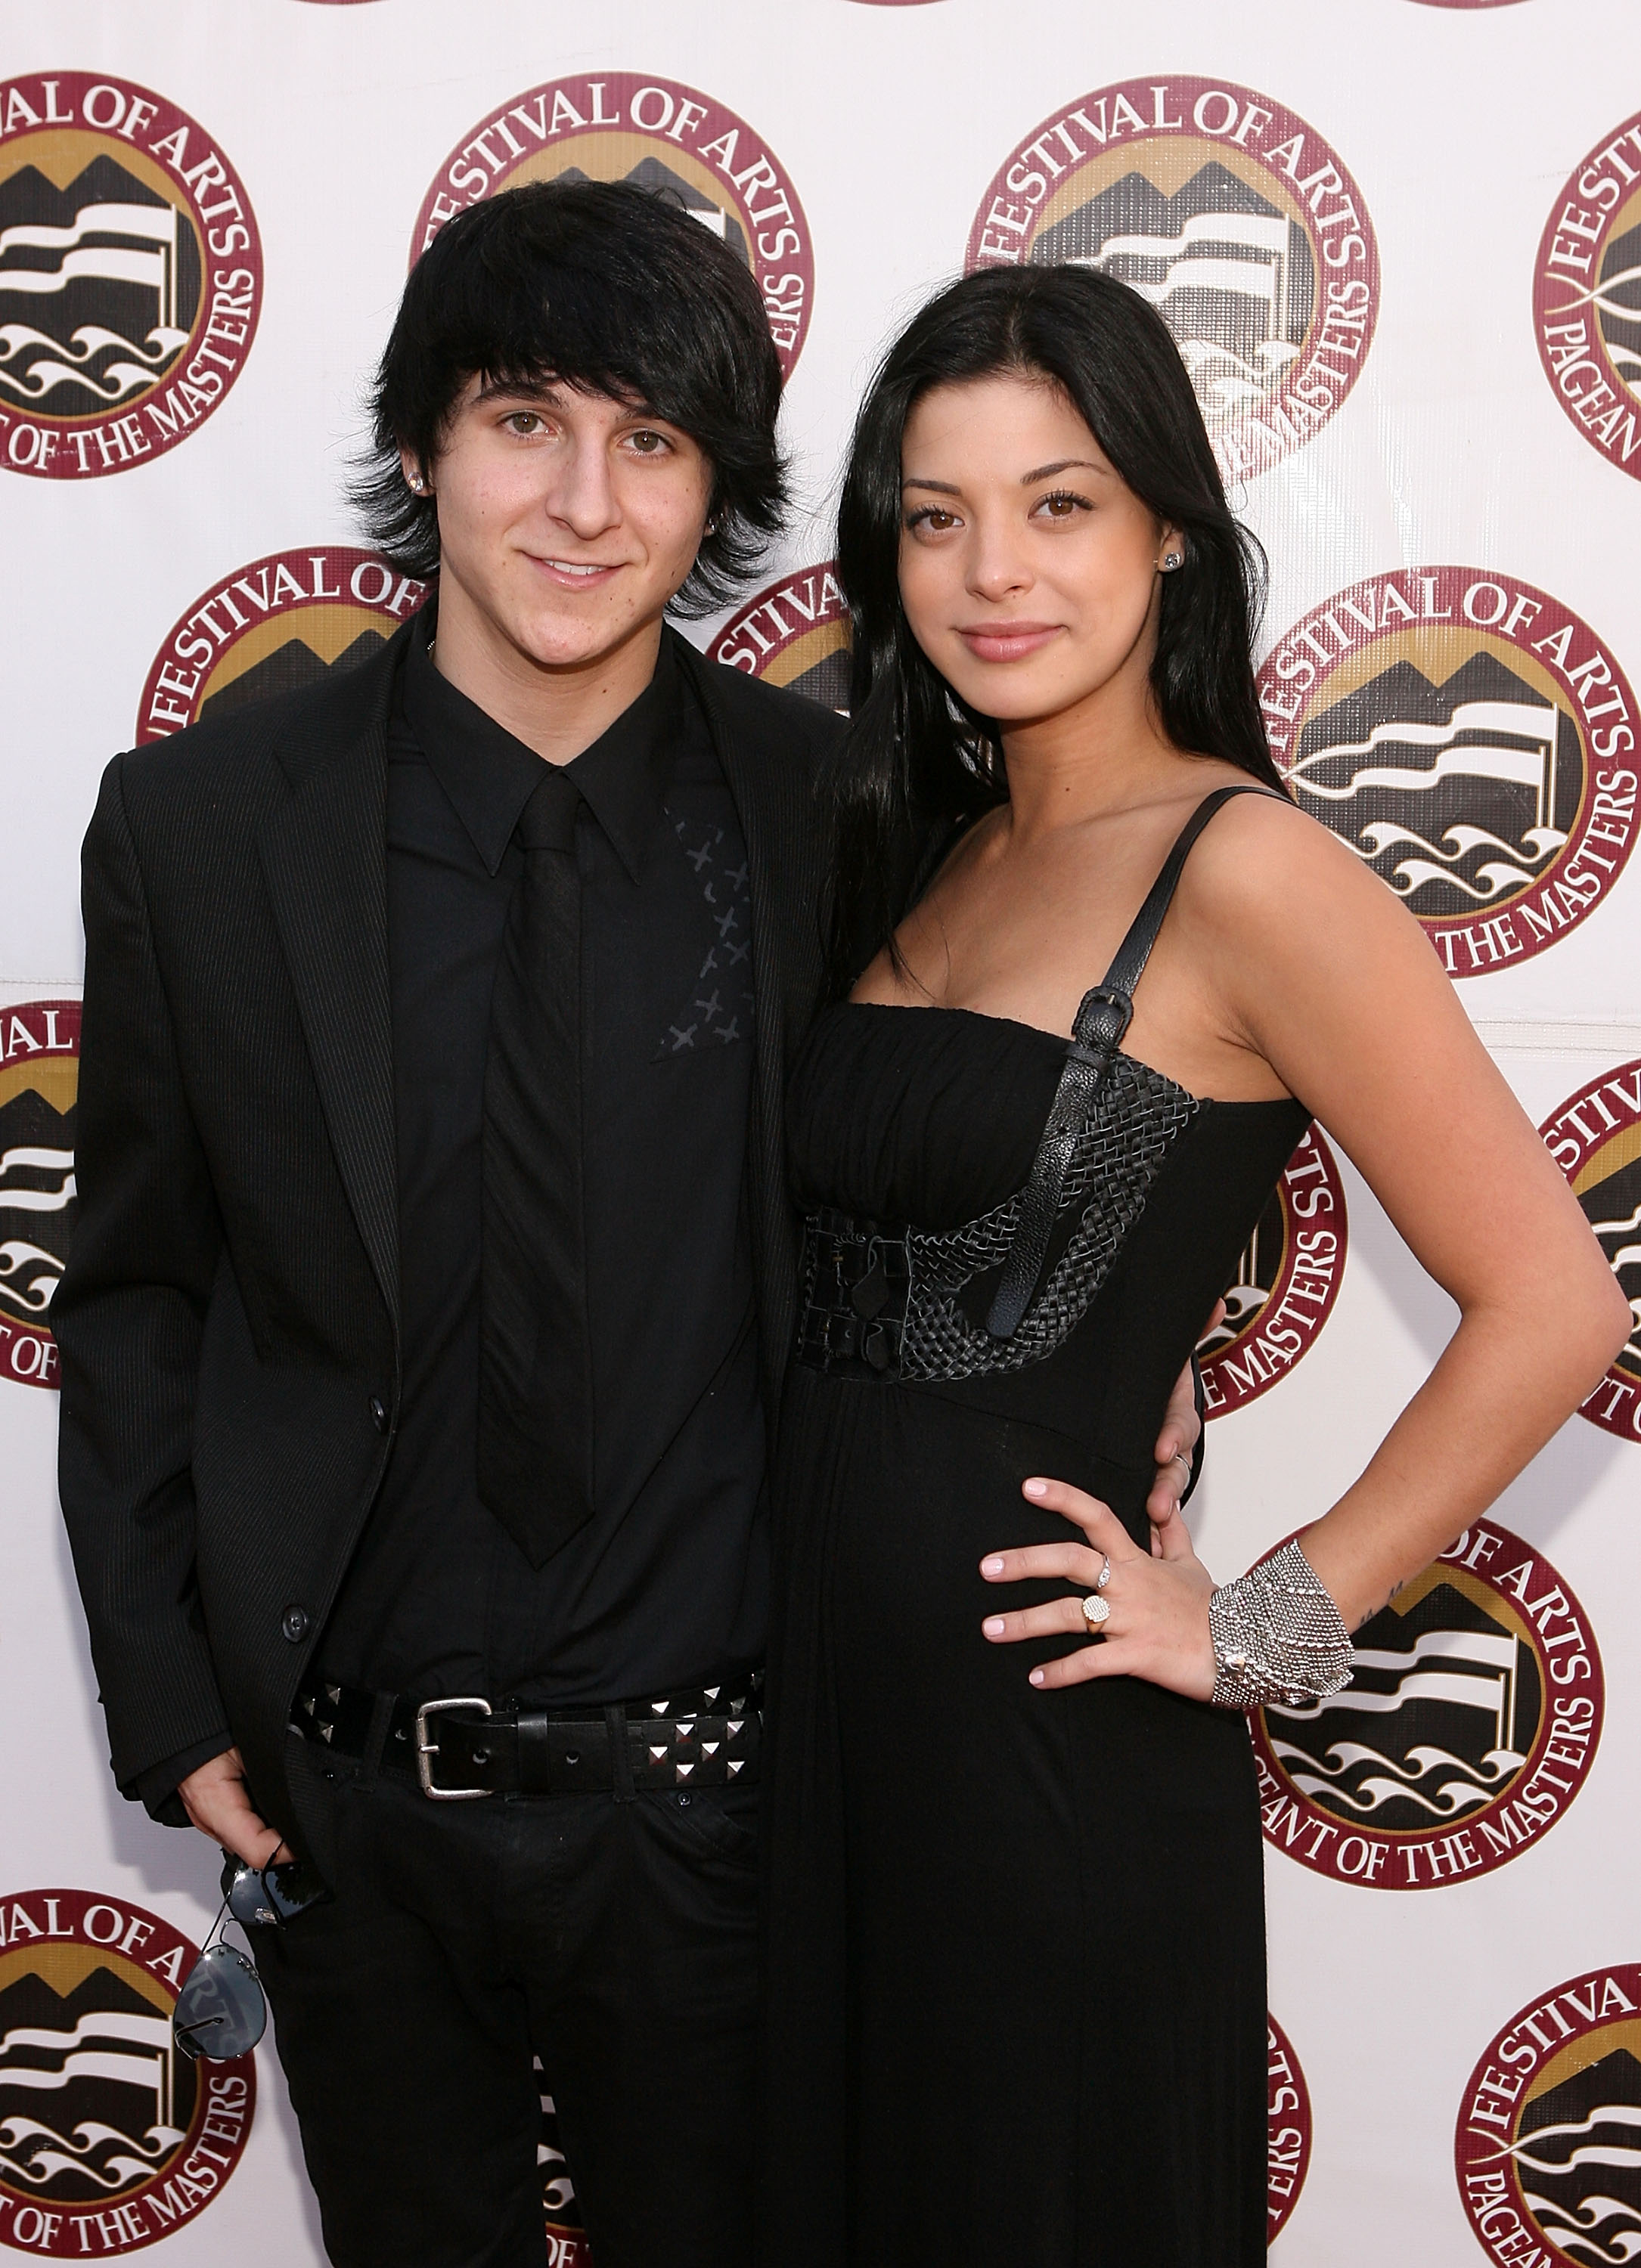 Mitchel Musso and Gia Mantegna attend The Festival of Arts/Pageant of The Masters 2009 Gala Benefit at the Irvine Bowl Park on August 29, 2009, in Laguna Beach, California. | Source: Getty Images